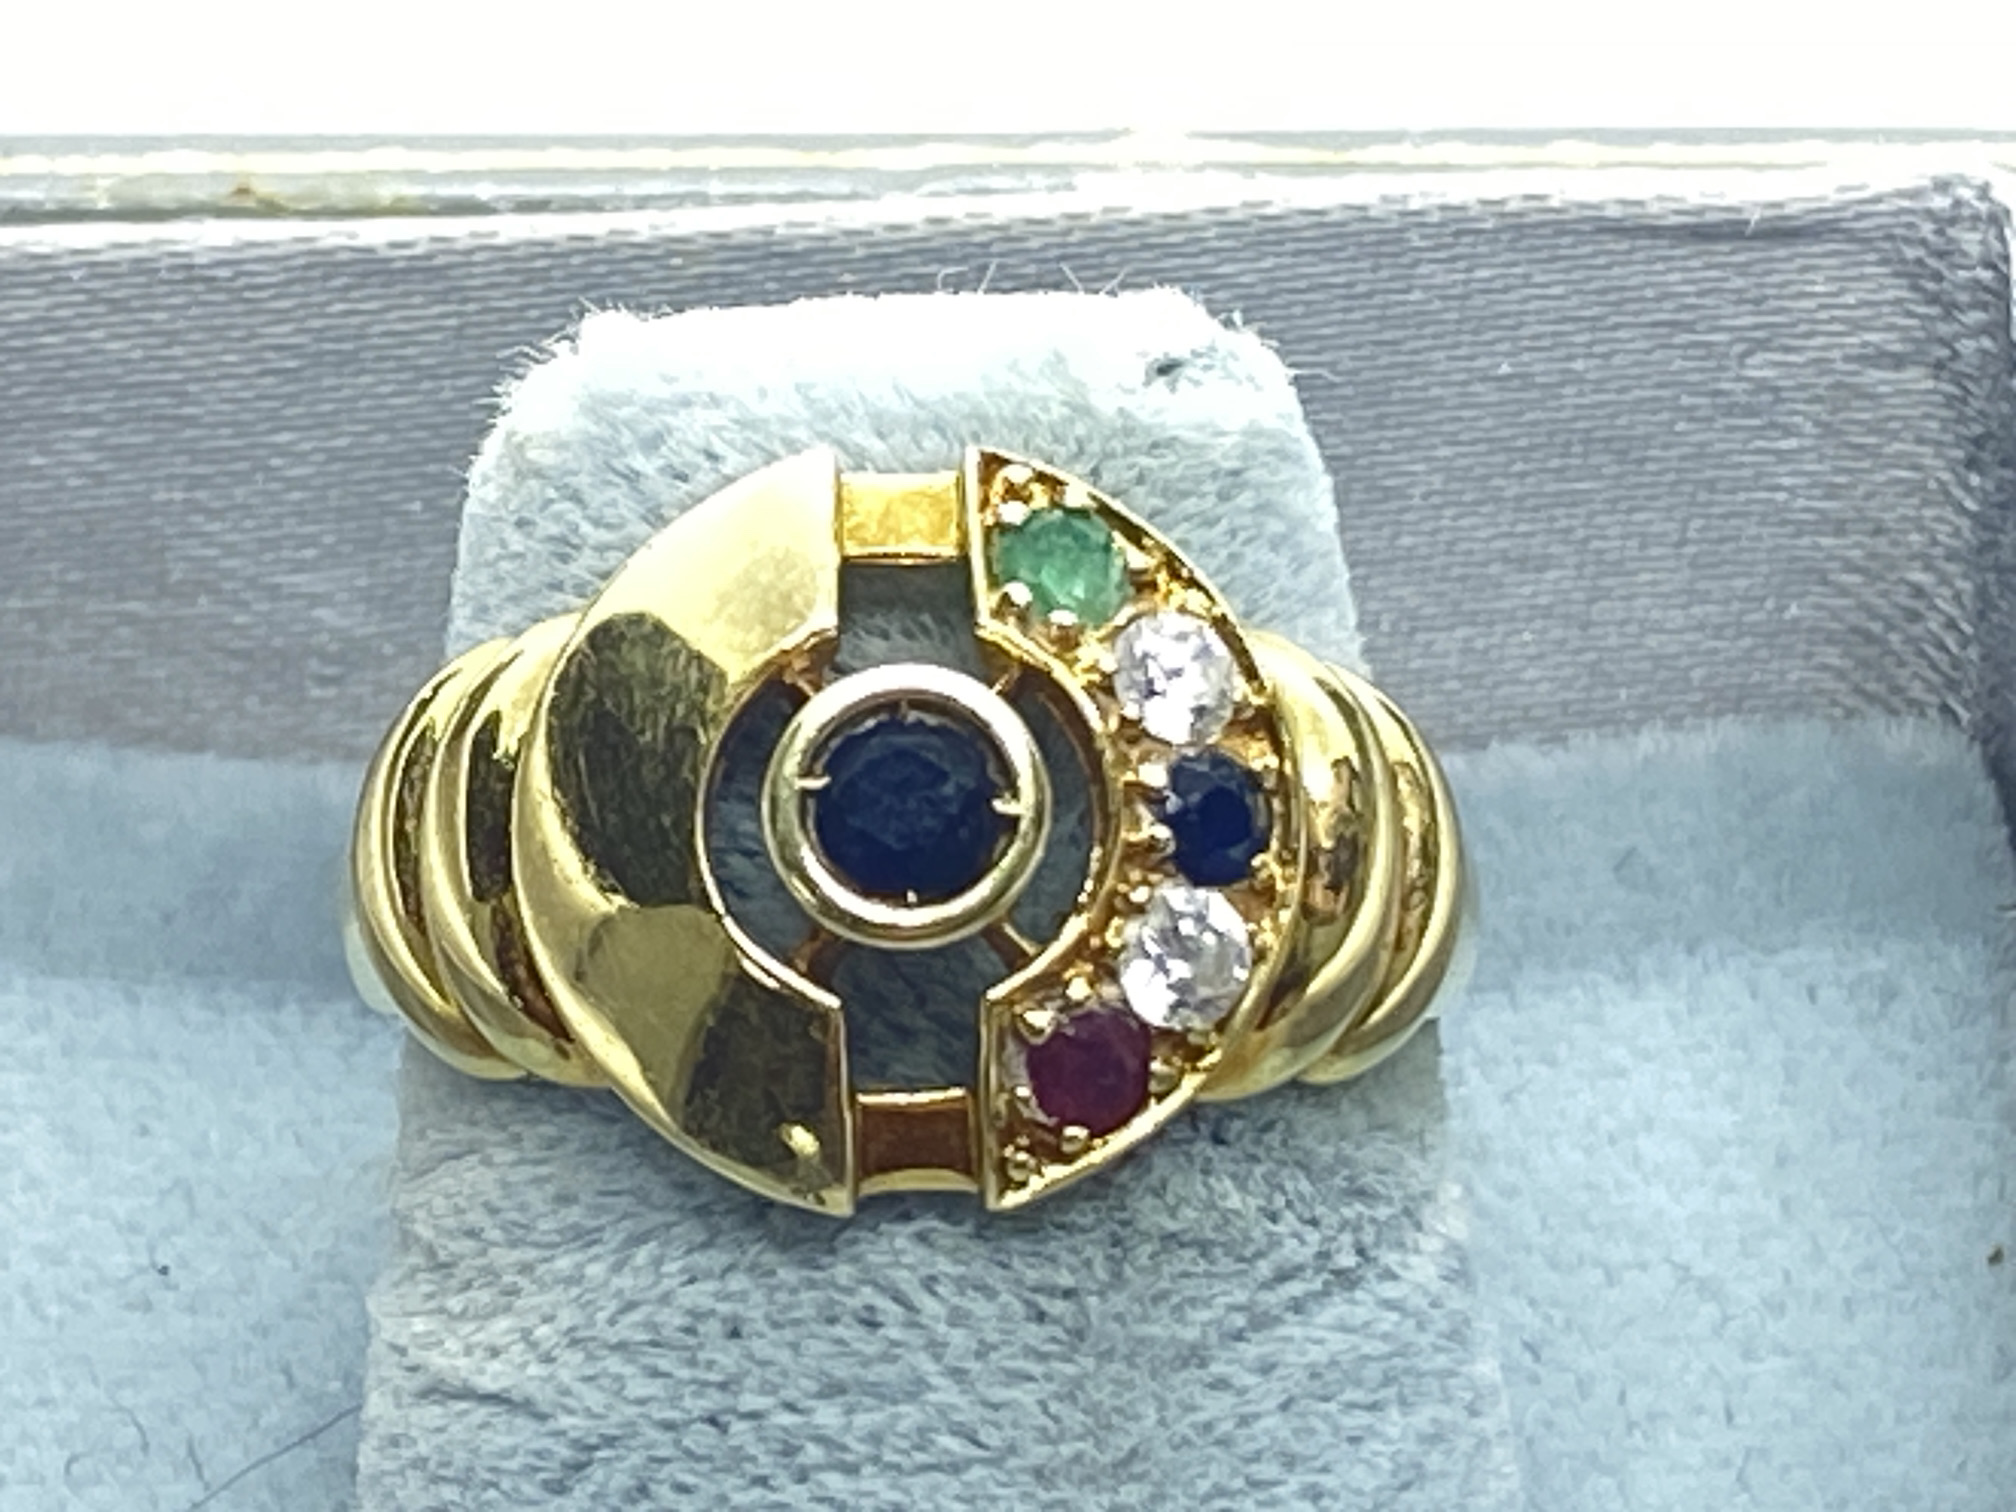 MULTI GEM SET RING MADE OF GOLD METAL TESTED AS AT LEAST 9CT GOLD